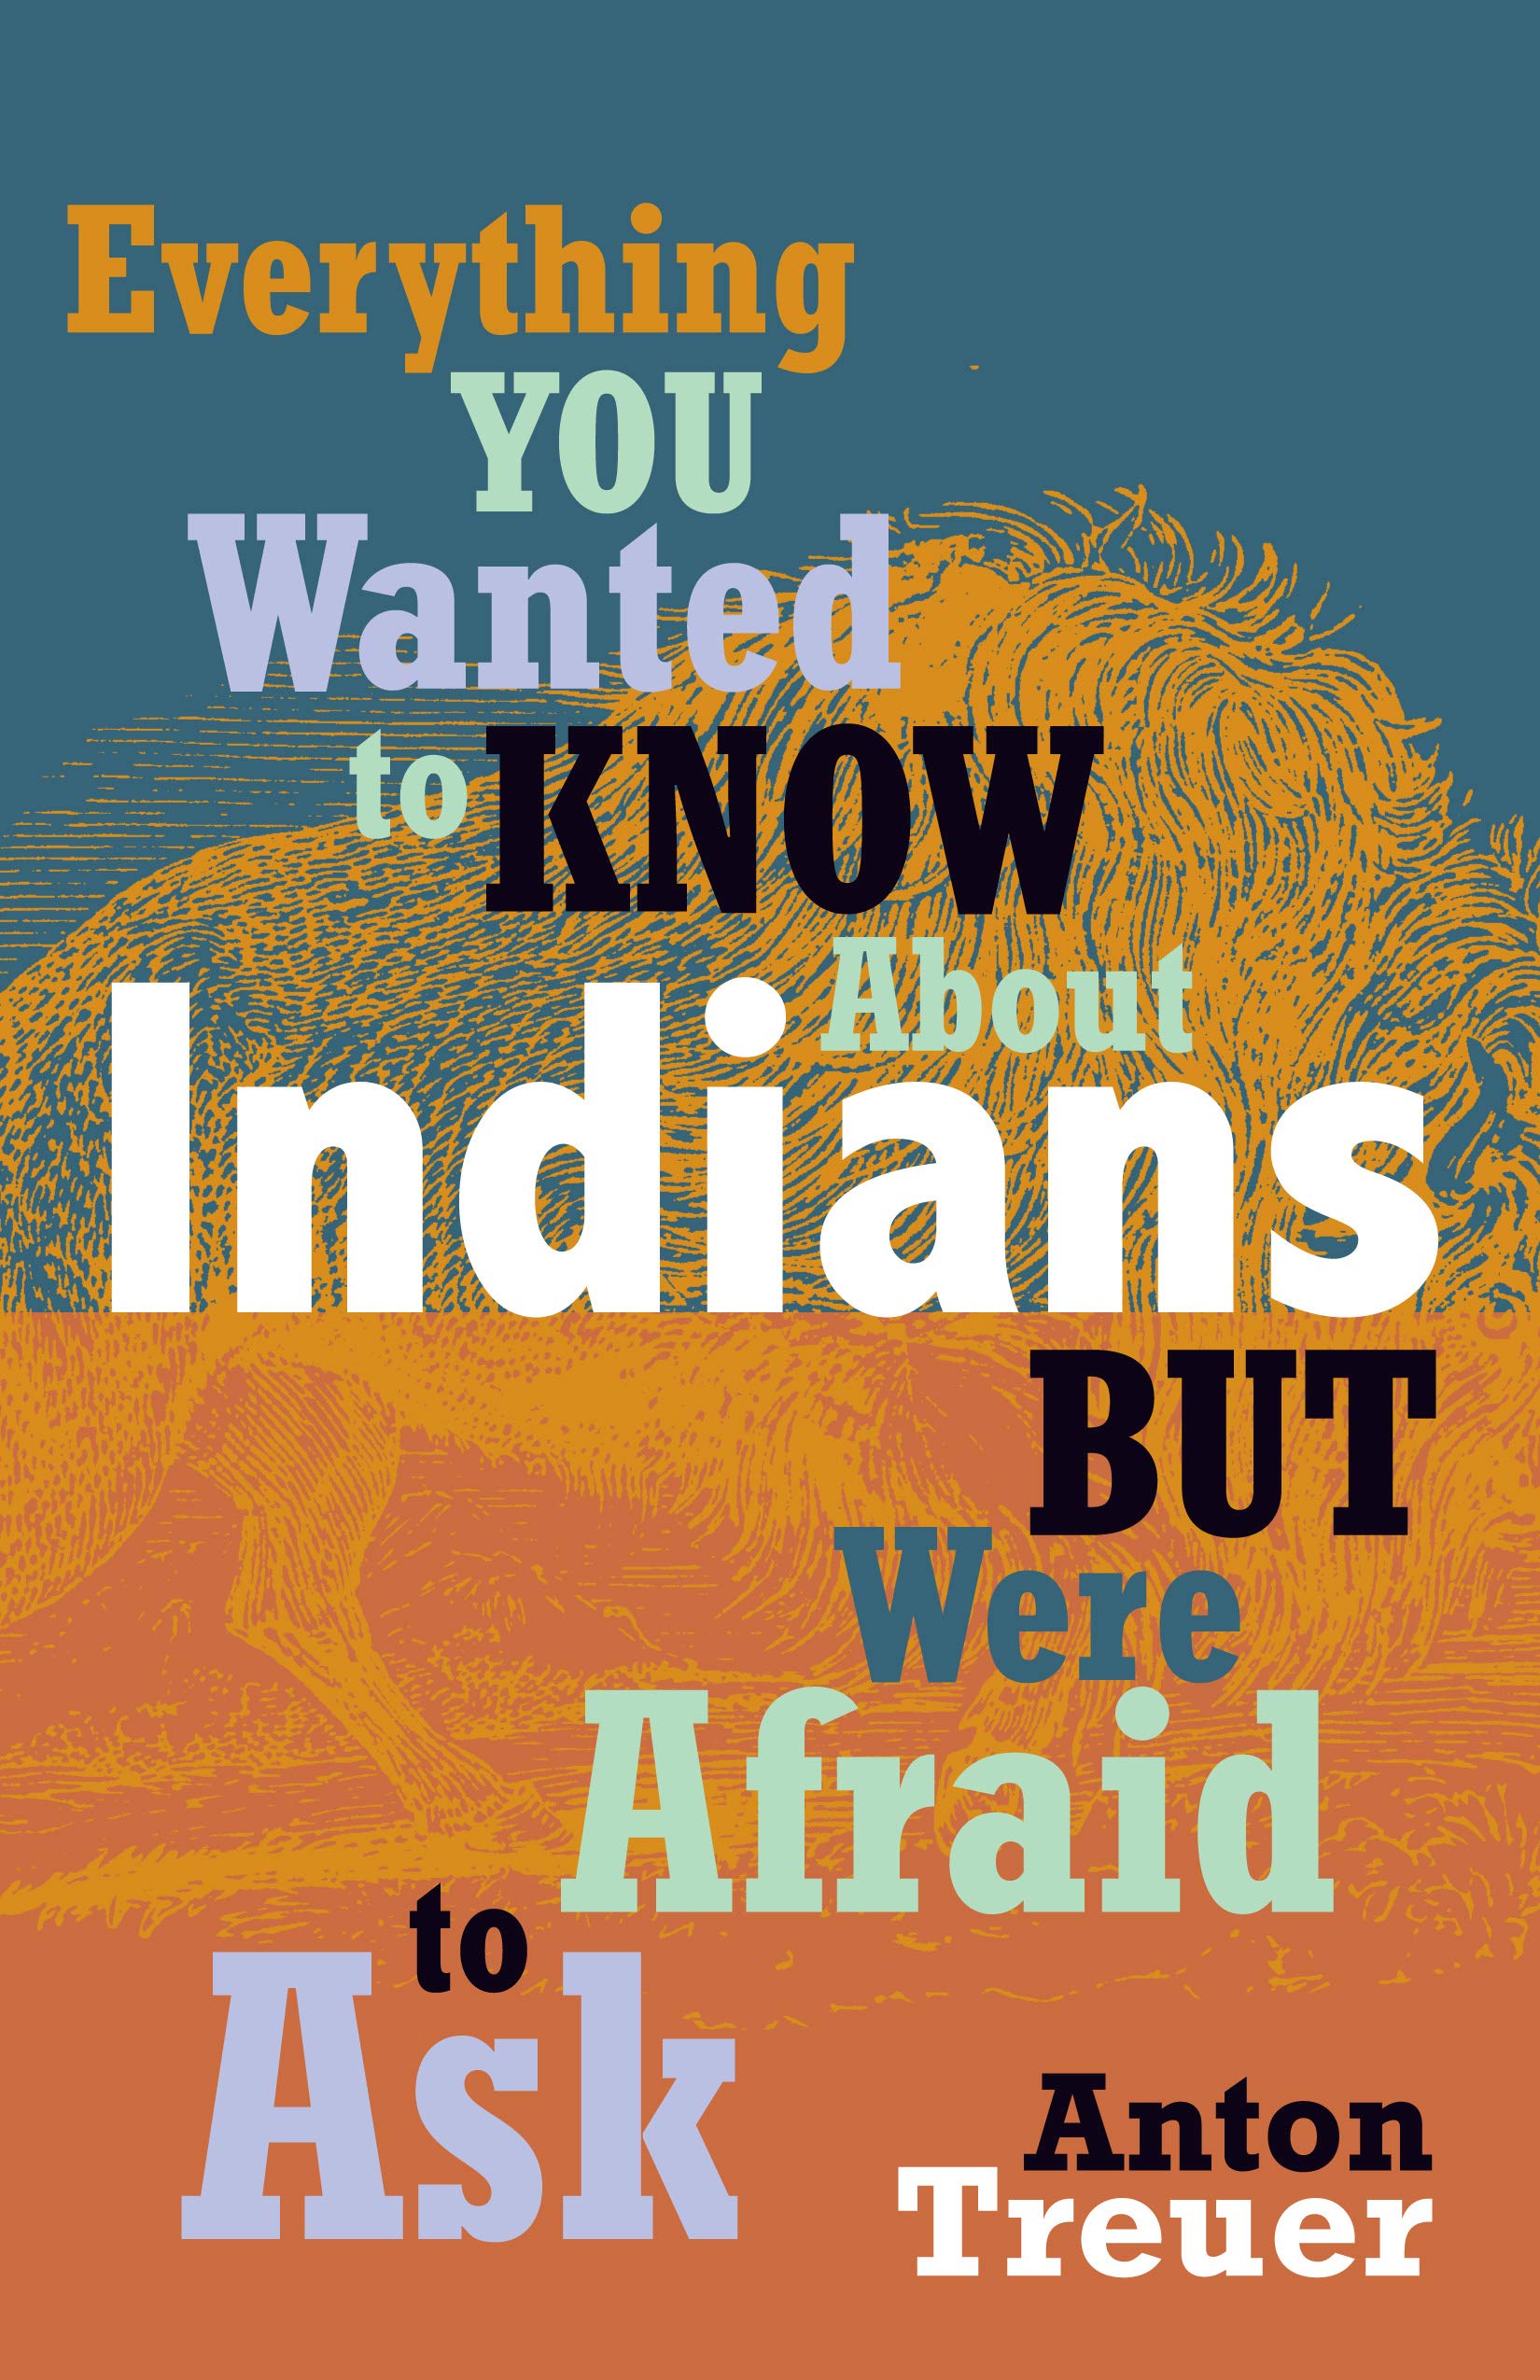 book cover of "Everything You Ever Wanted to Know About Indians But Were Afraid to Ask"